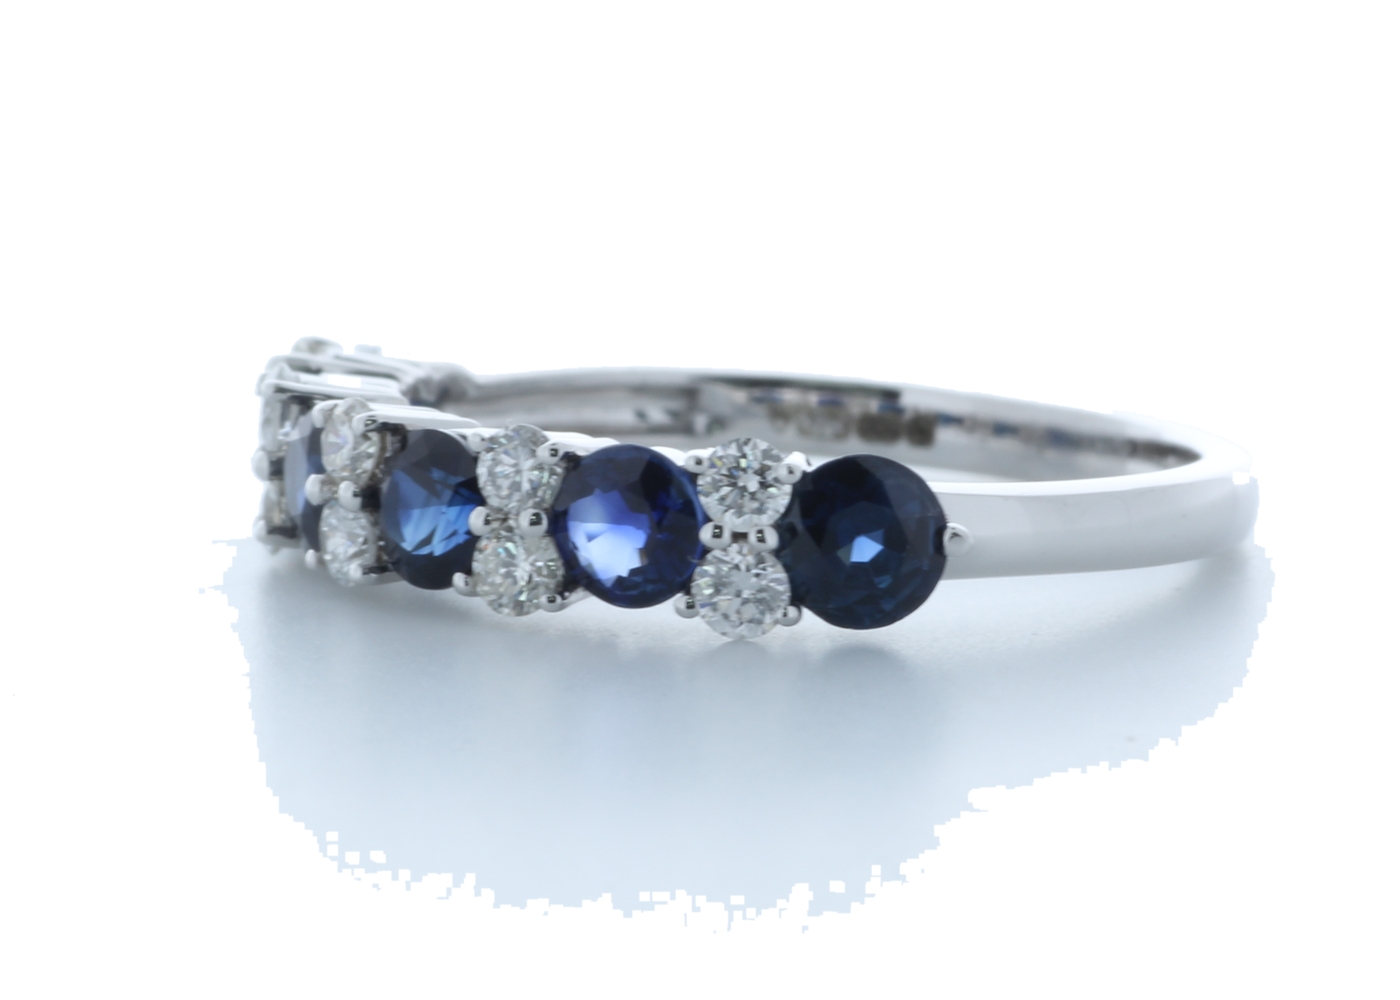 9ct White Gold Claw Set Semi Eternity Diamond and Sapphire Ring (S1.31) 0.31 Carats - Image 2 of 5